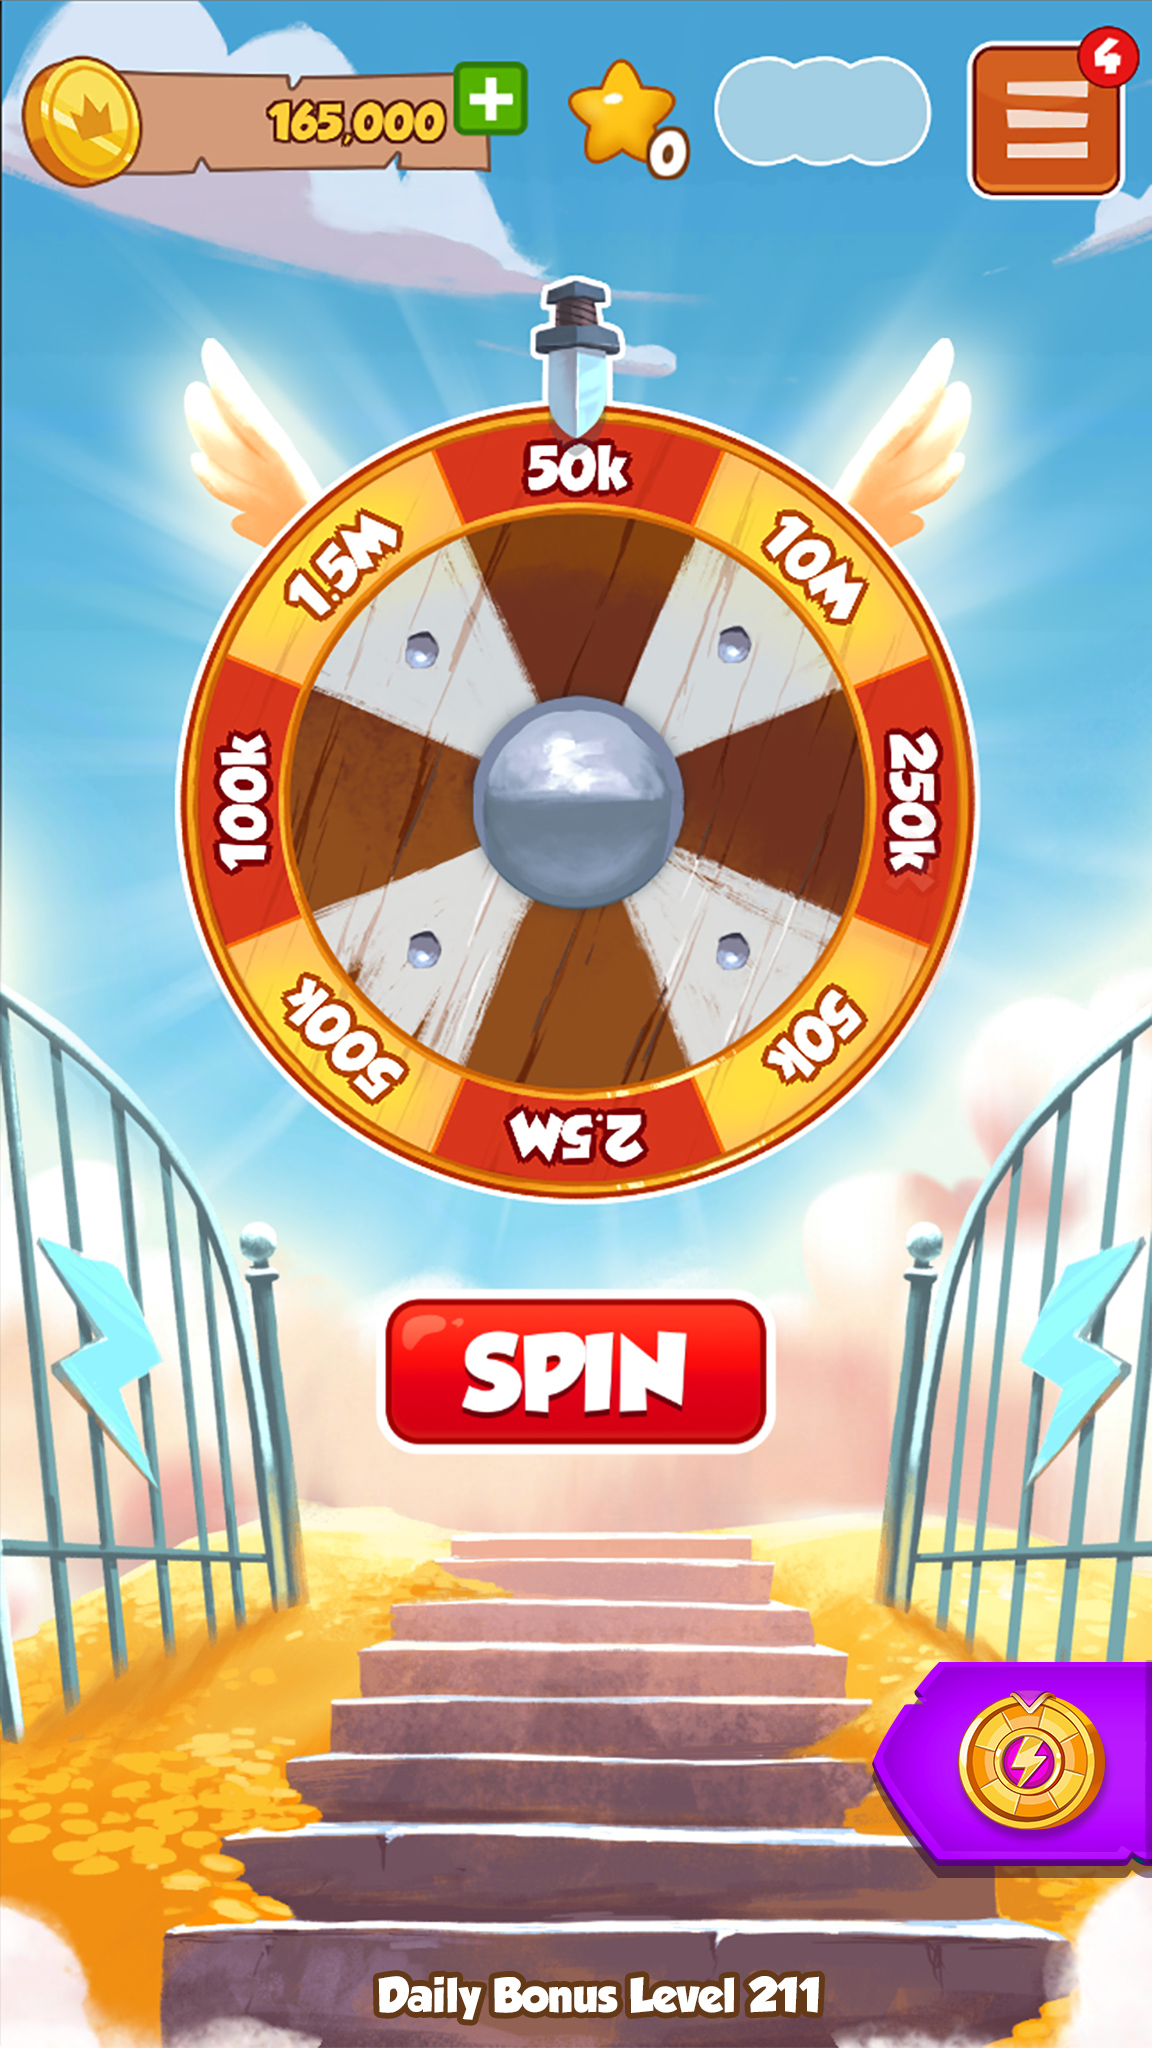 Coin Master Thor Wheel - Daily Free Spins and Coins Link